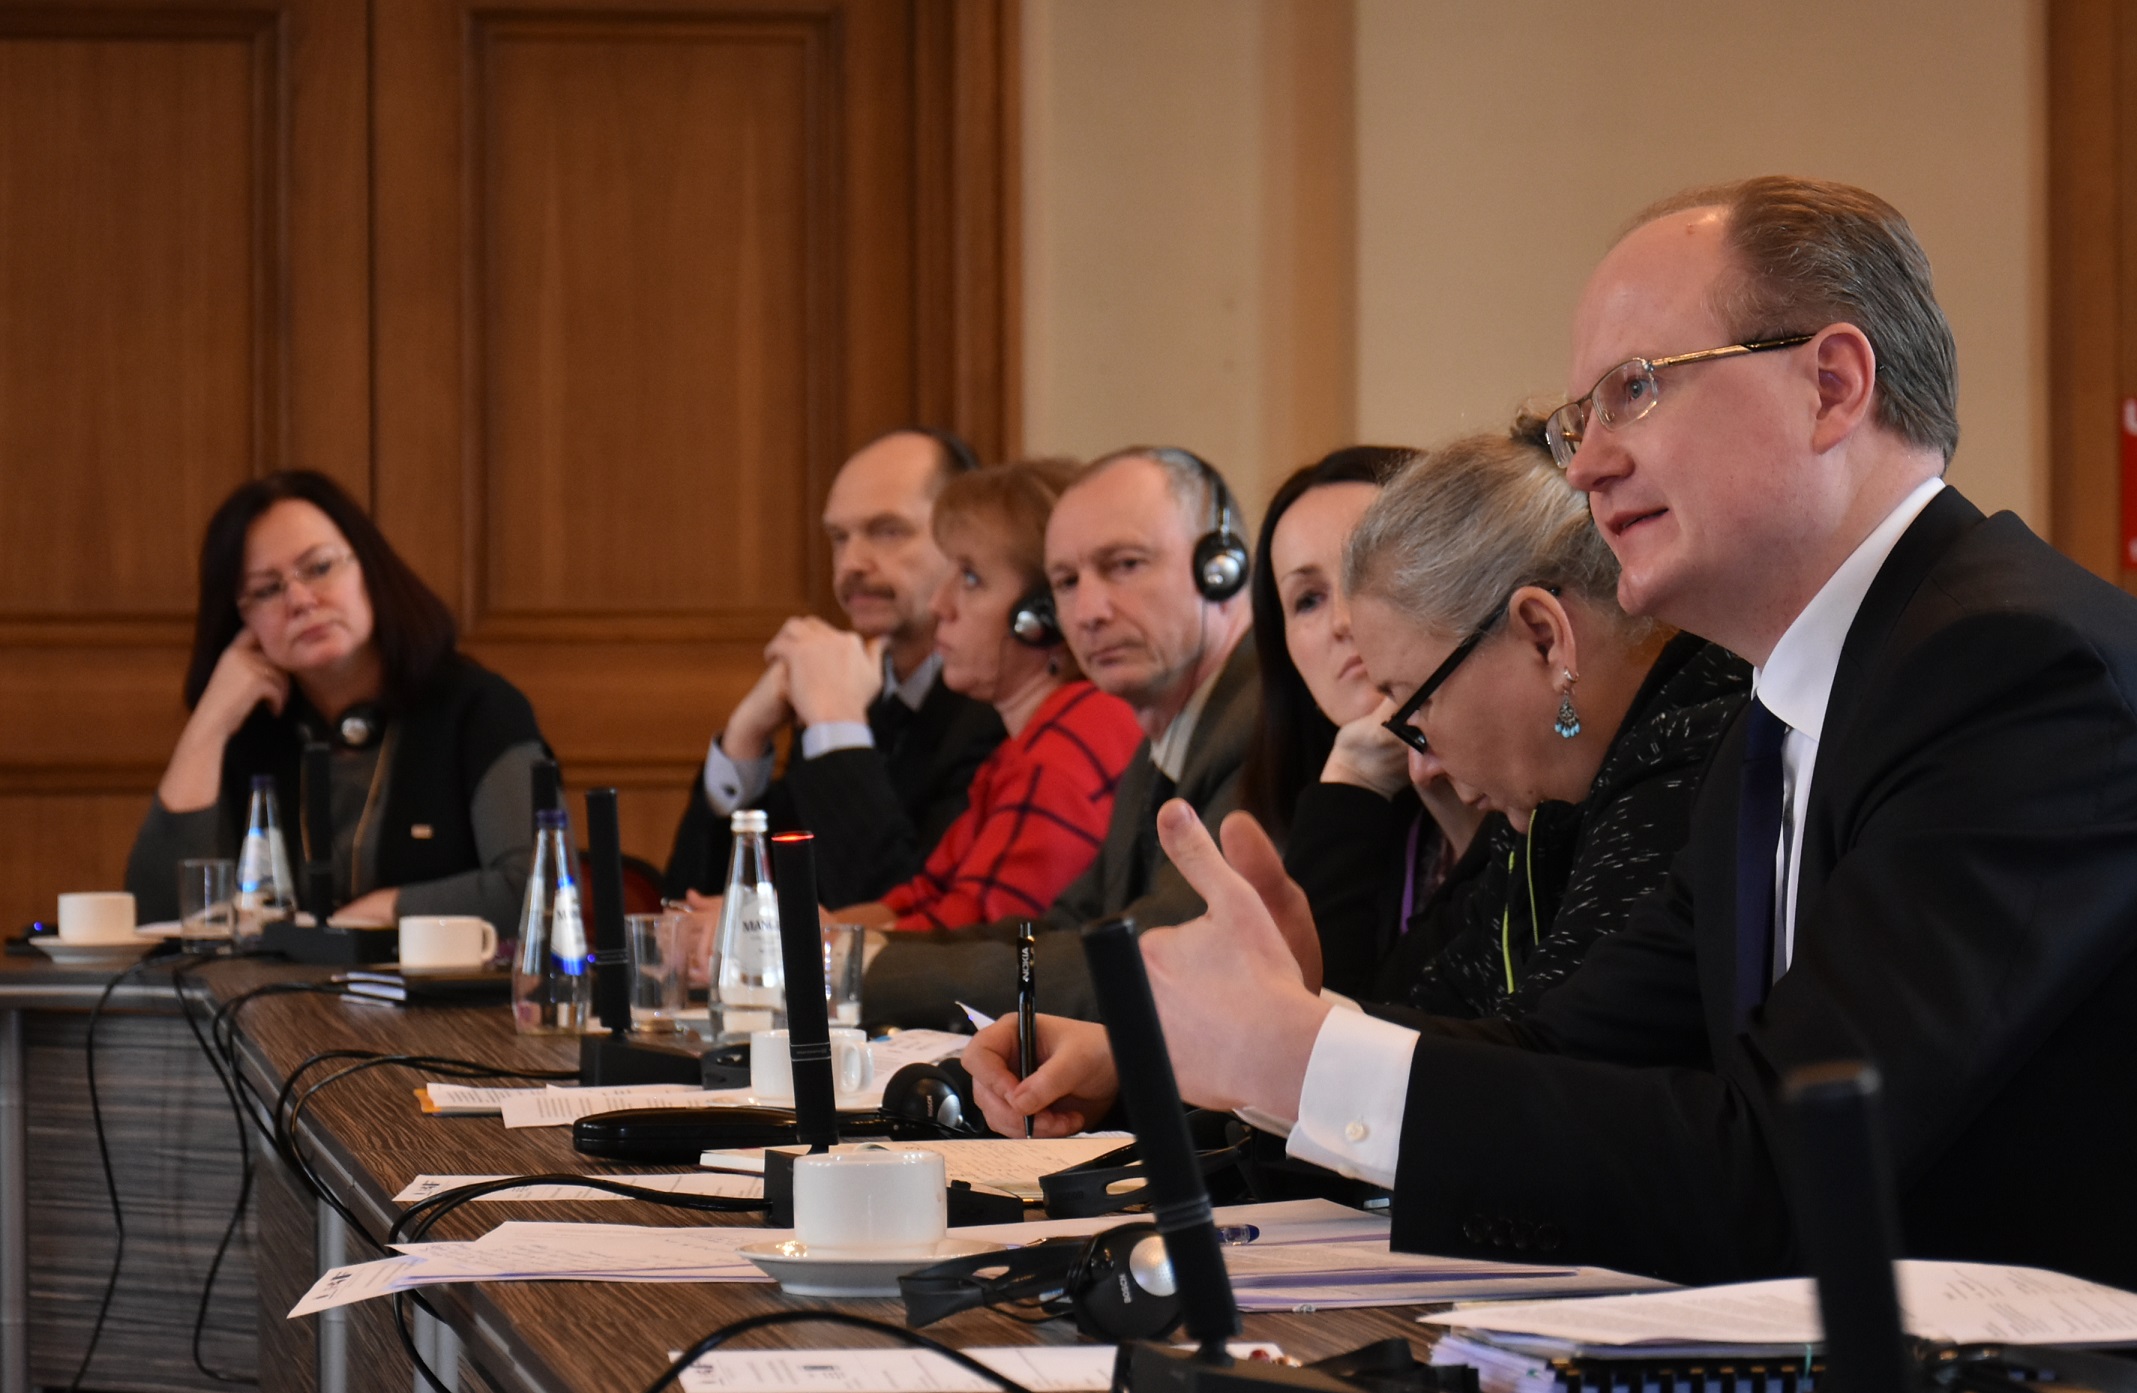 Presentation of the Evaluation report of the Latvian judicial system by CEPEJ experts